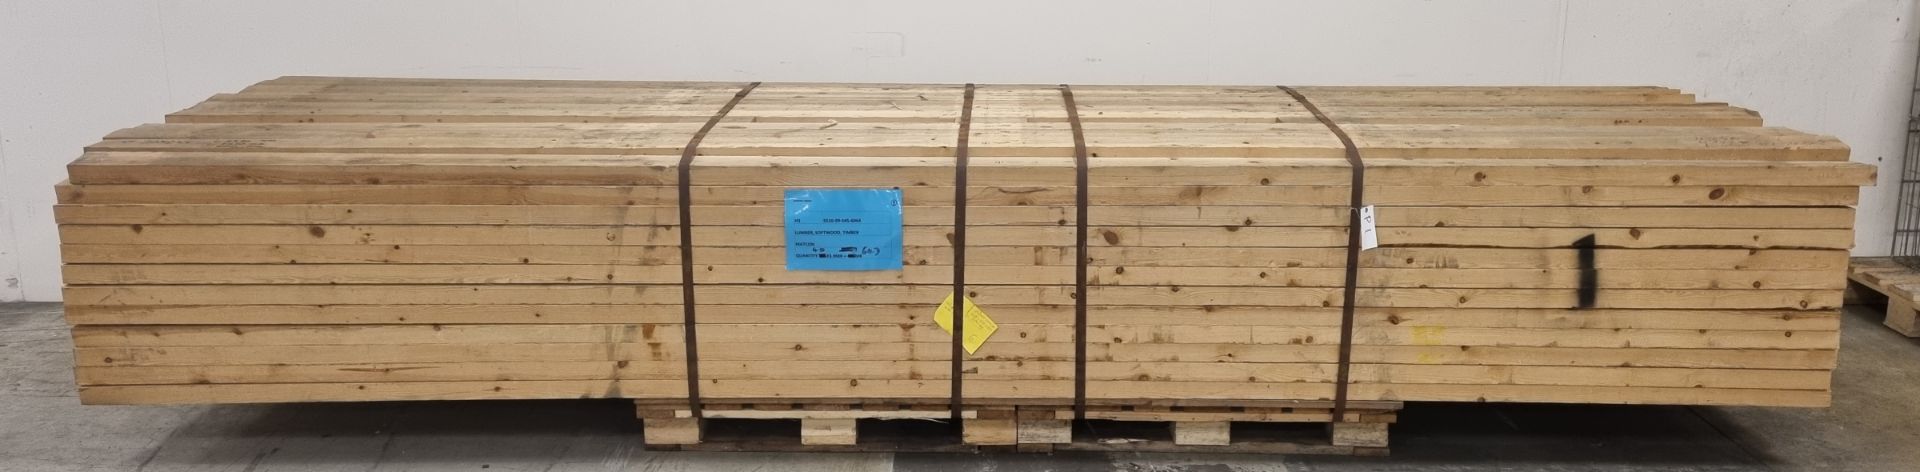 Pallet of 4"x2" (10x5cm) softwood, heat treated and debarked (GBFC-0452 DBHT) - L450cm - 143 pieces